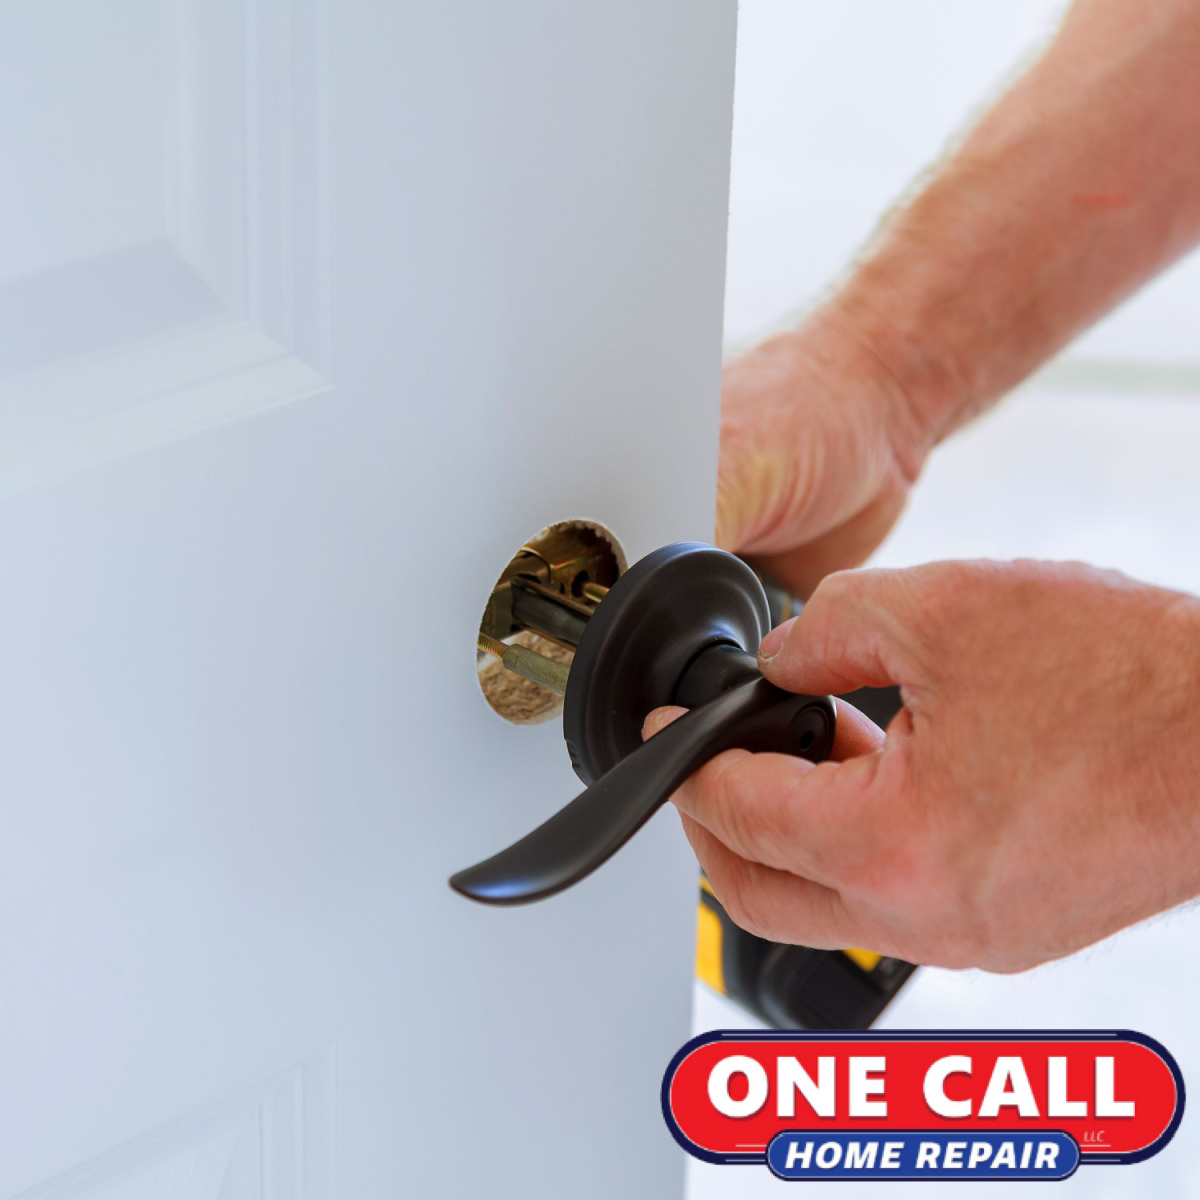 Let One Call Home Repair Solve Your Door Troubles in Mukilteo this Season